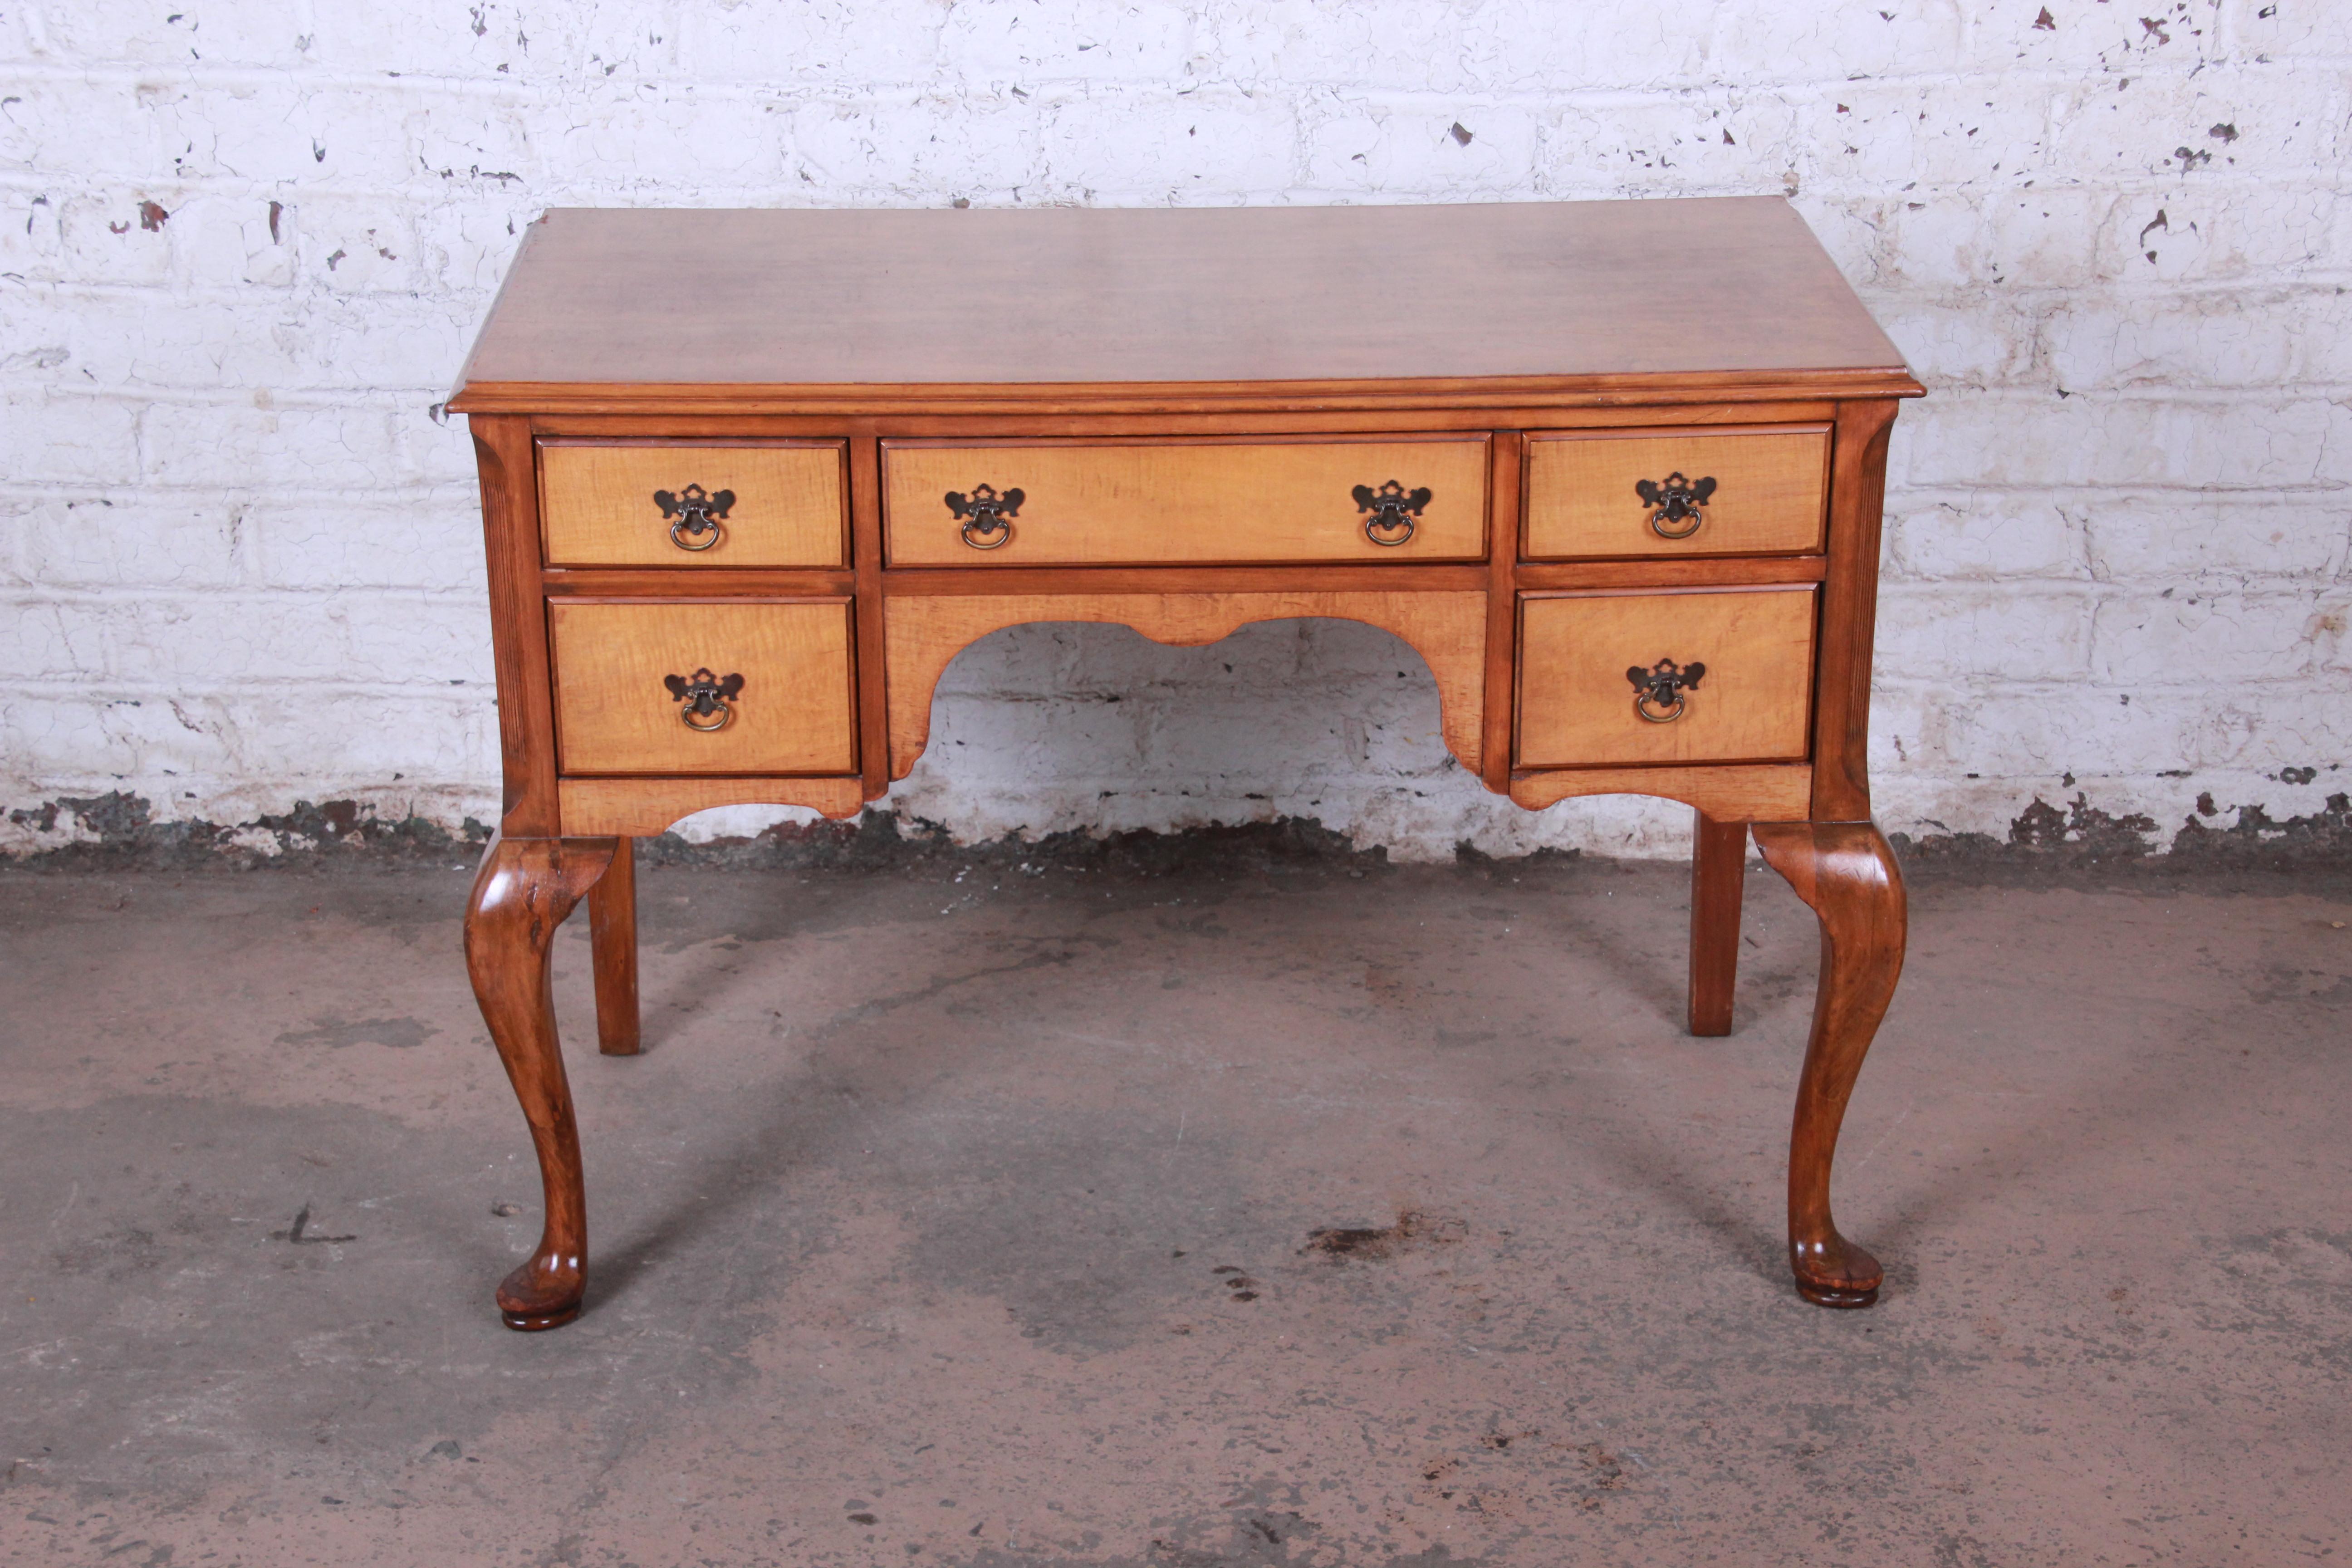 A beautiful antique Queen Anne style writing desk. The desk features gorgeous tiger maple wood grain and a nice traditional style. It offers good storage, with five dovetailed drawers. The desk was made in the early 1900s by J.B. Van Sciver Co. of